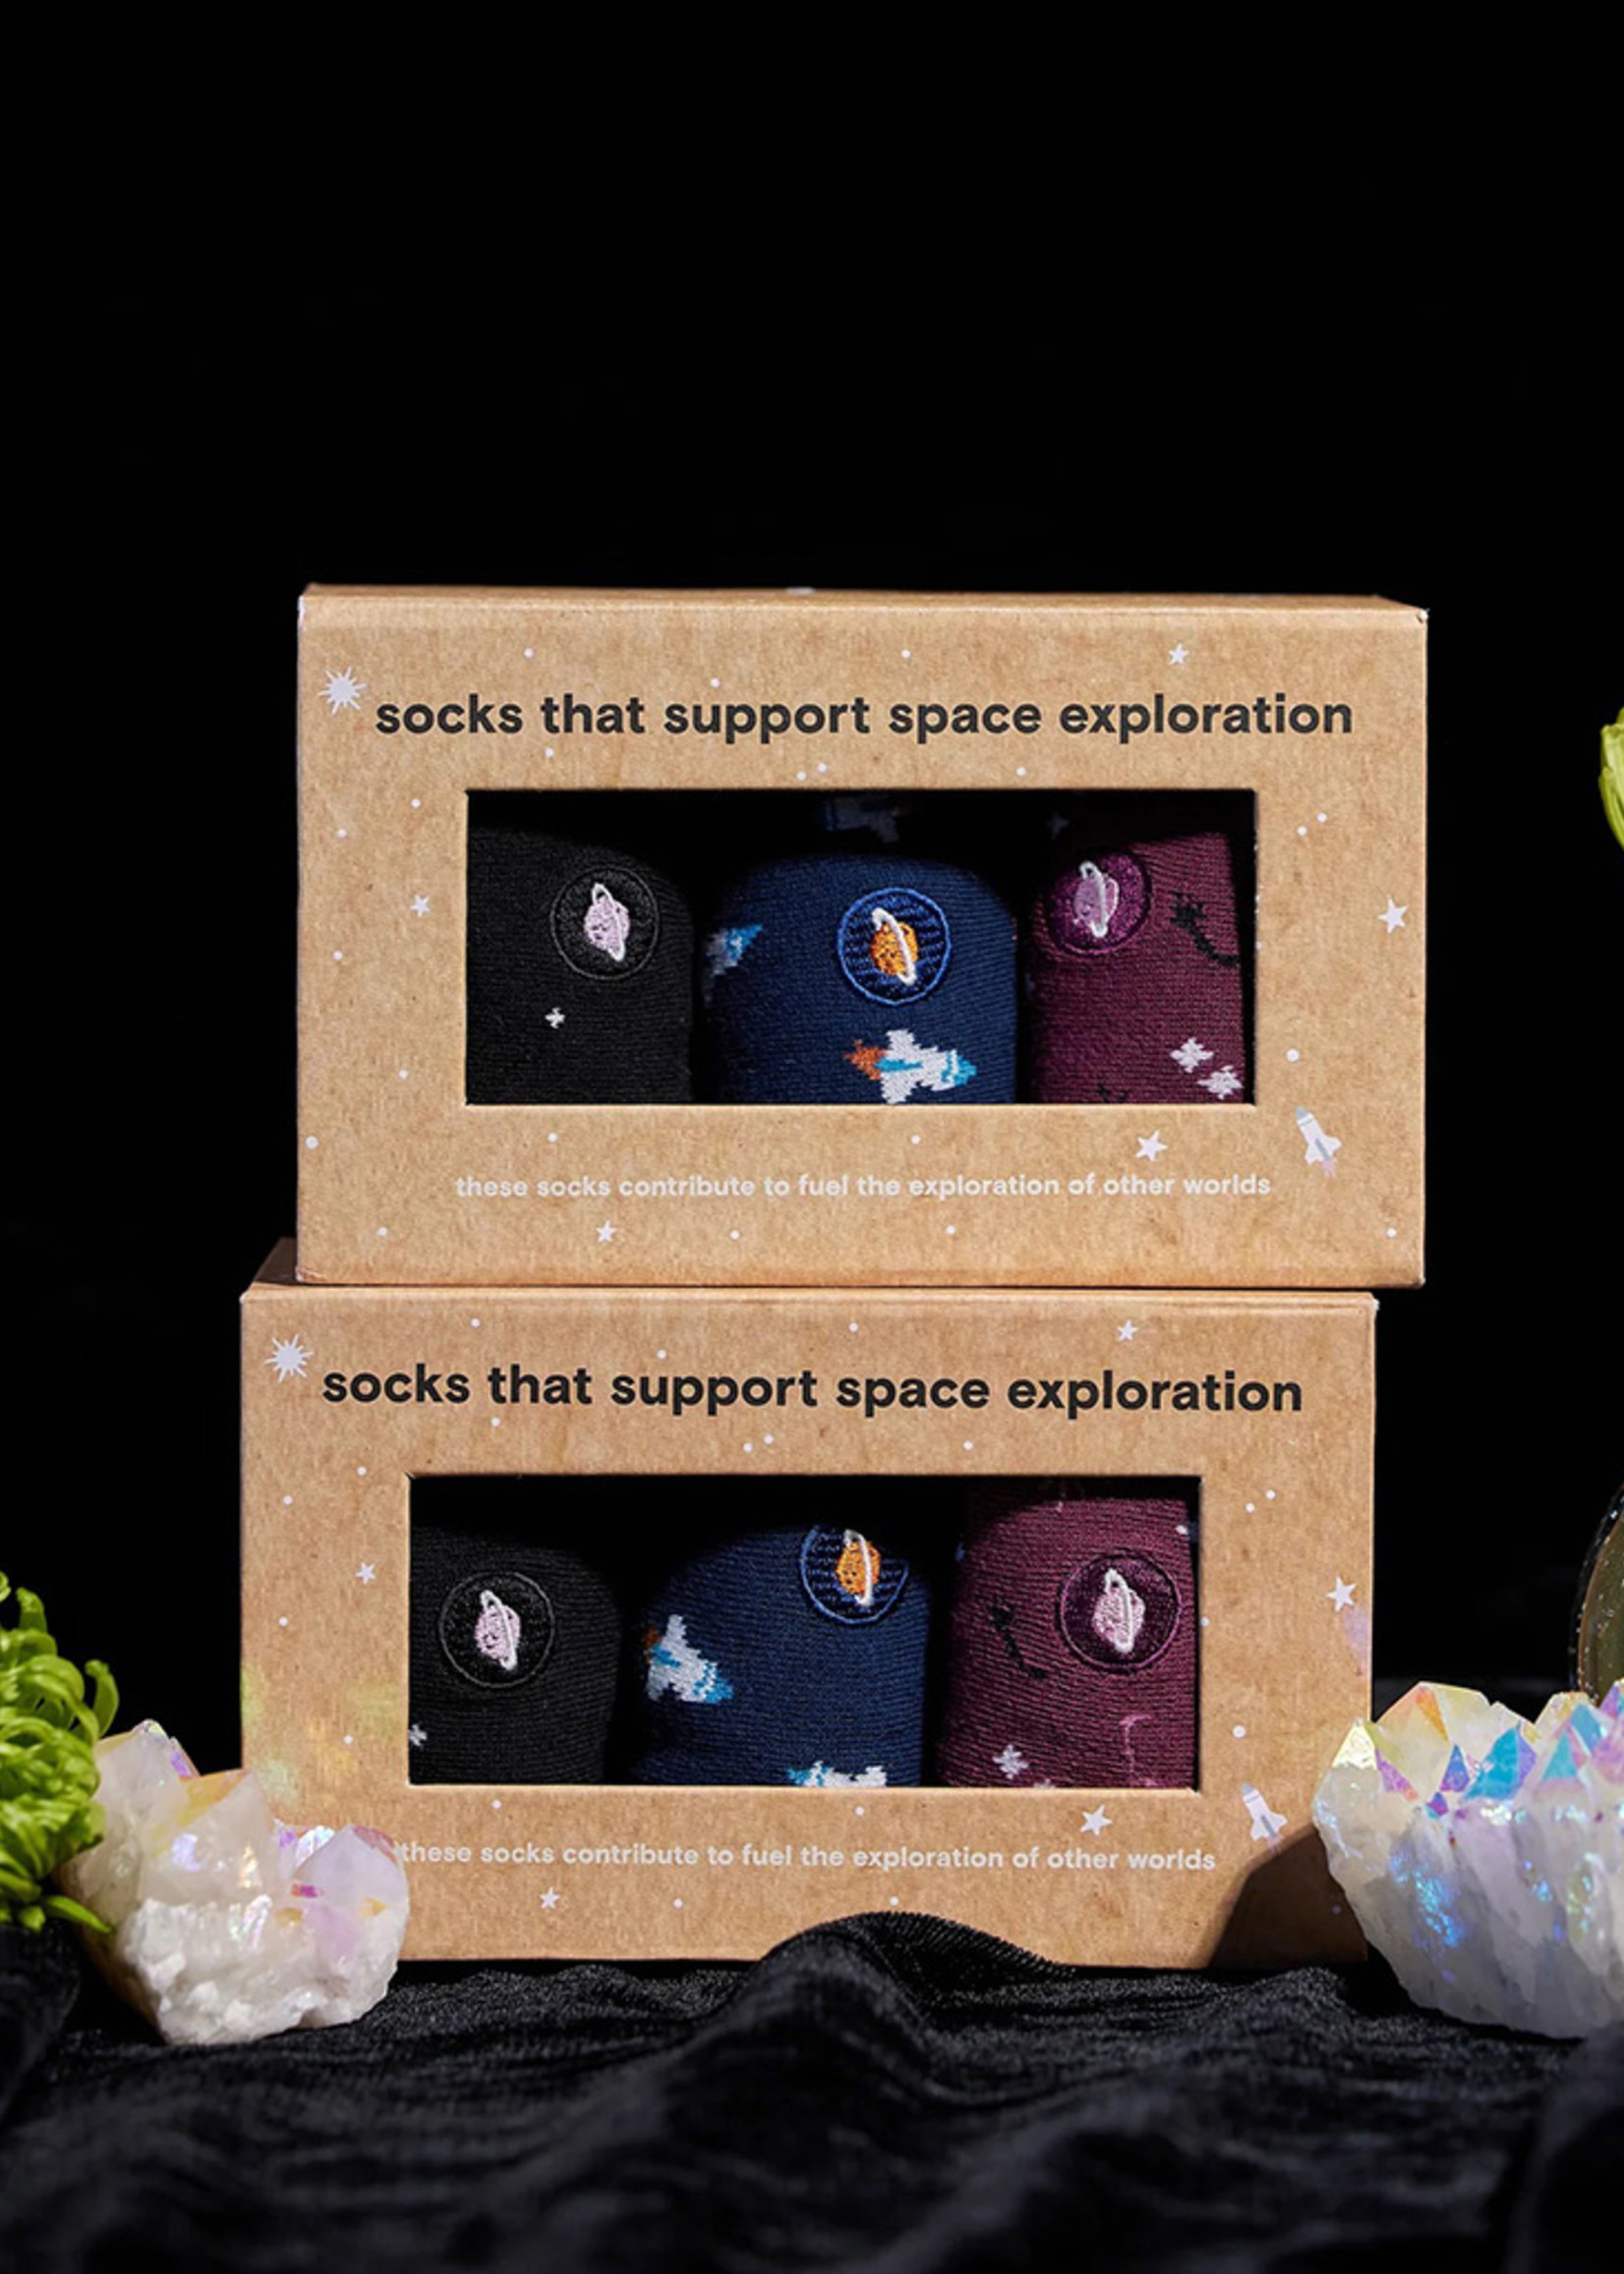 Conscious Step Men's Sock Box that Support Space Explore